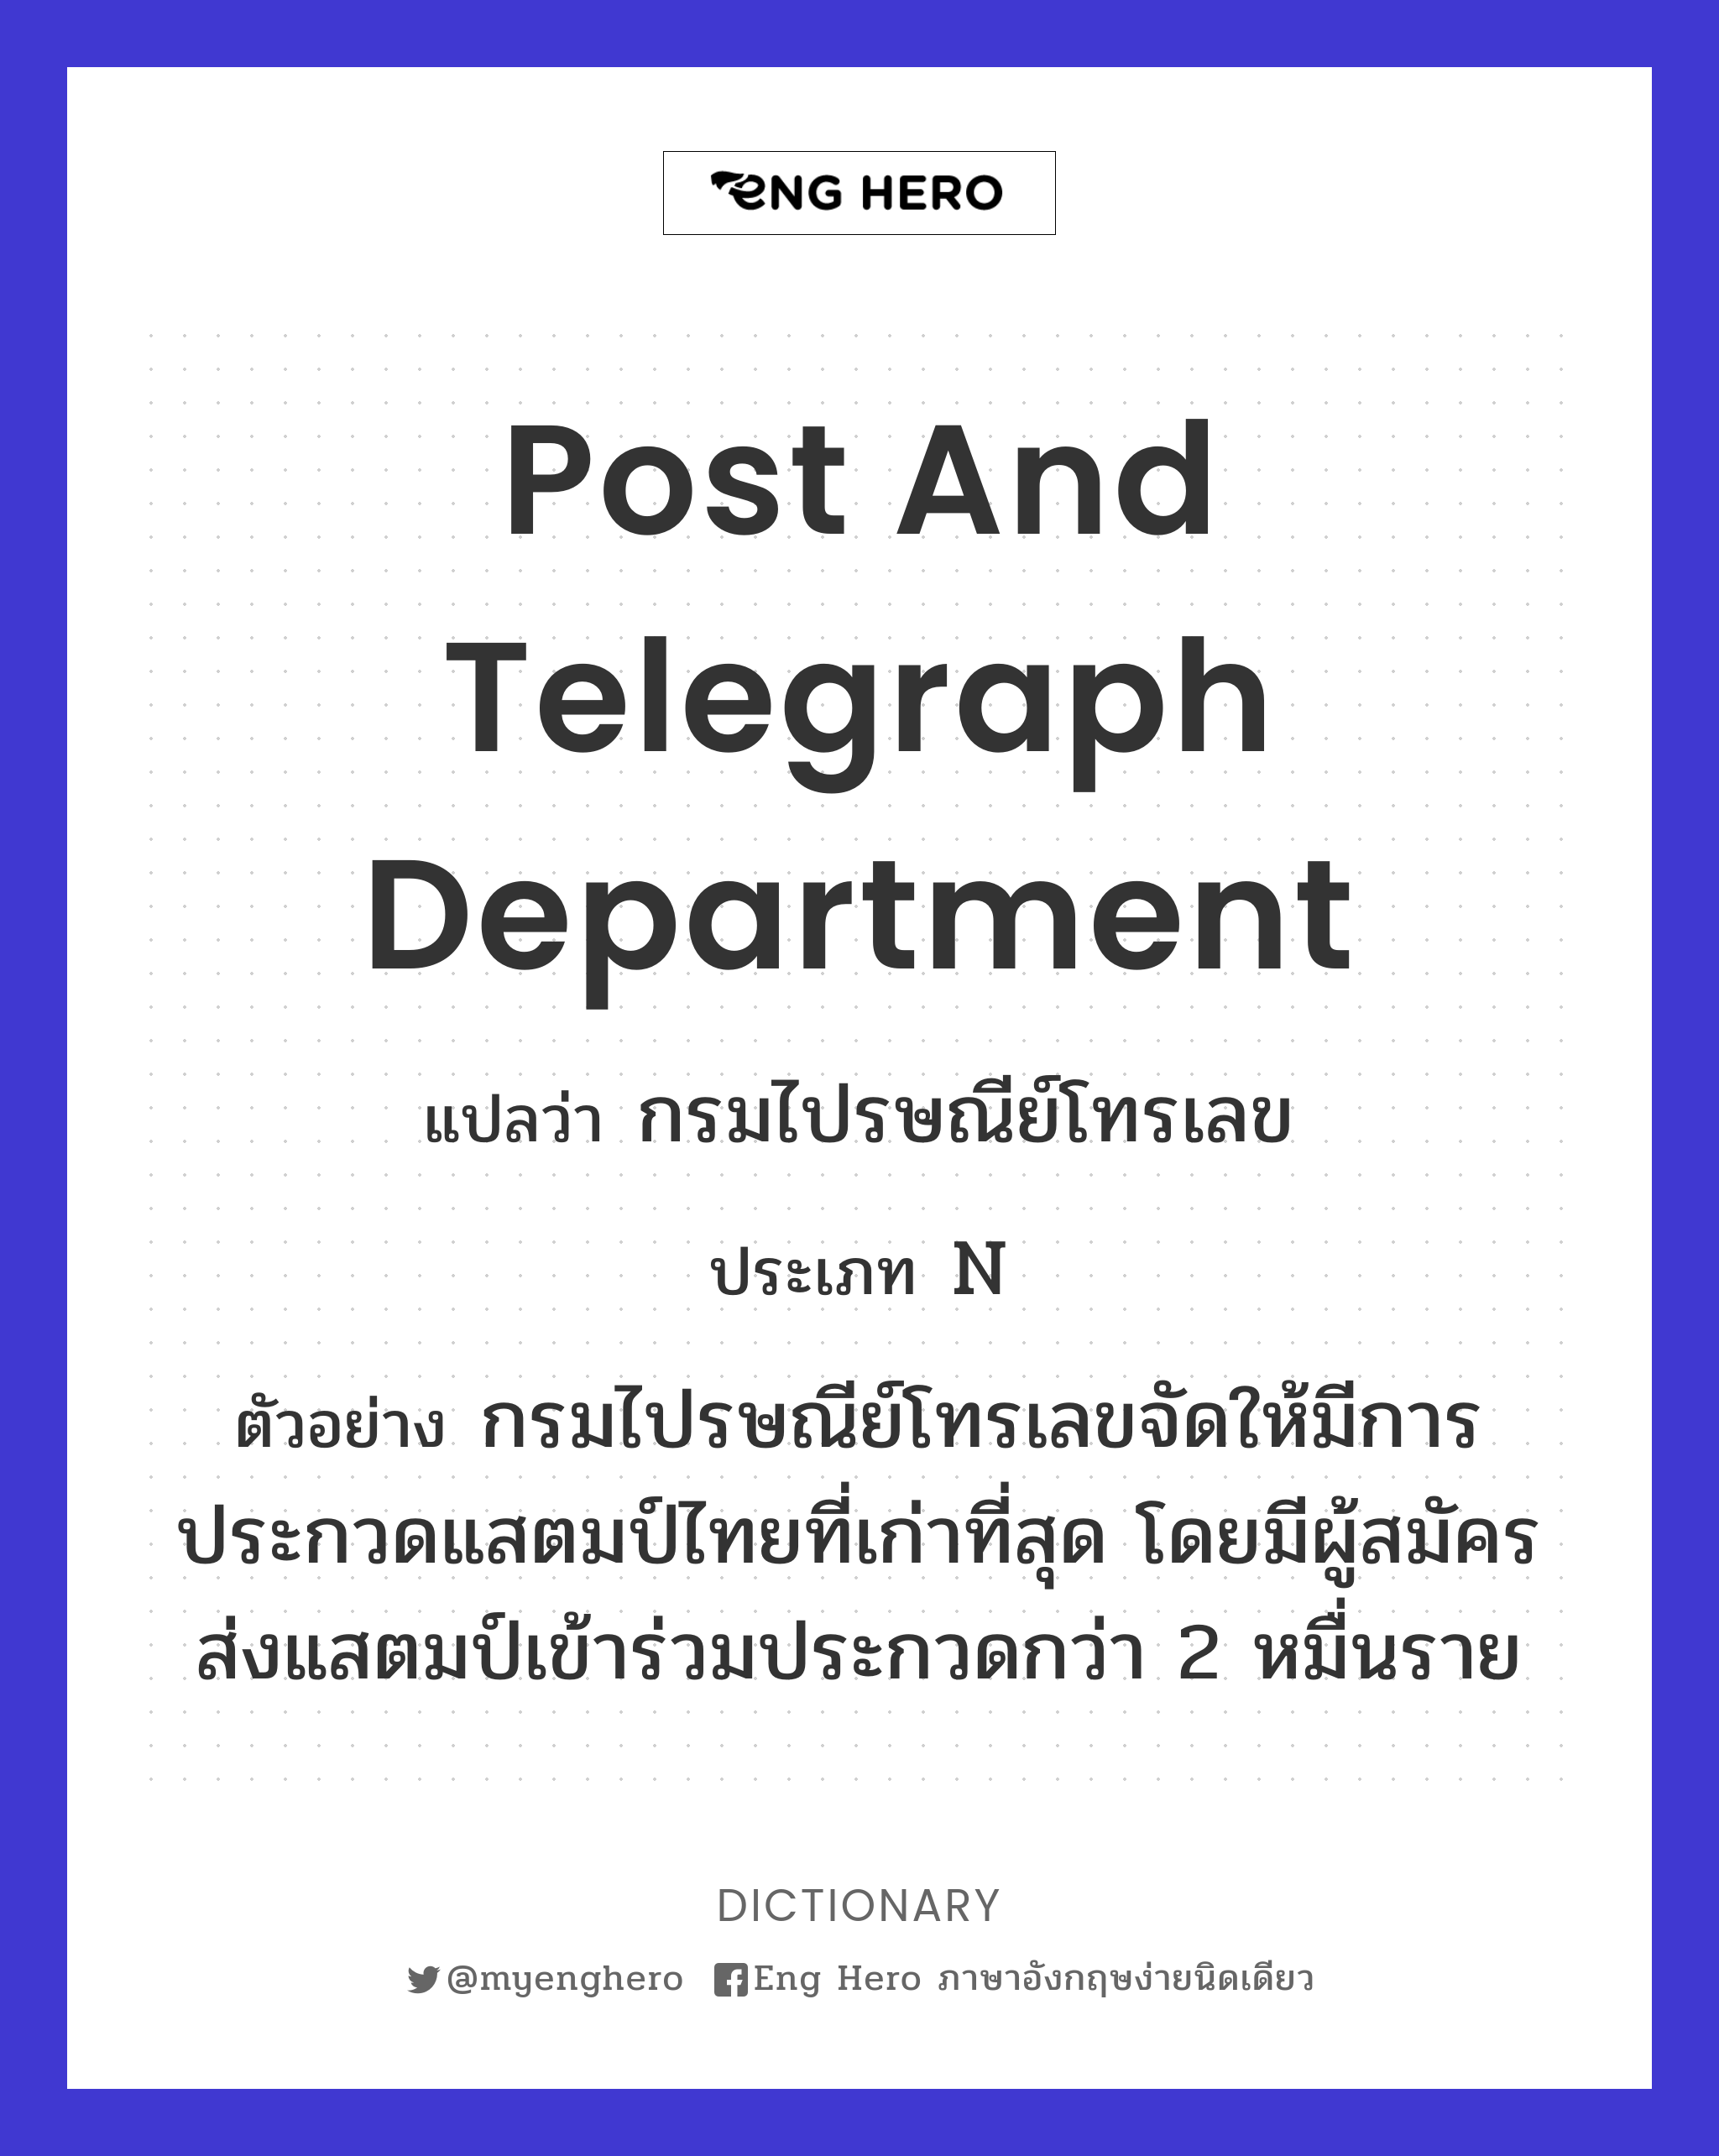 Post and Telegraph Department